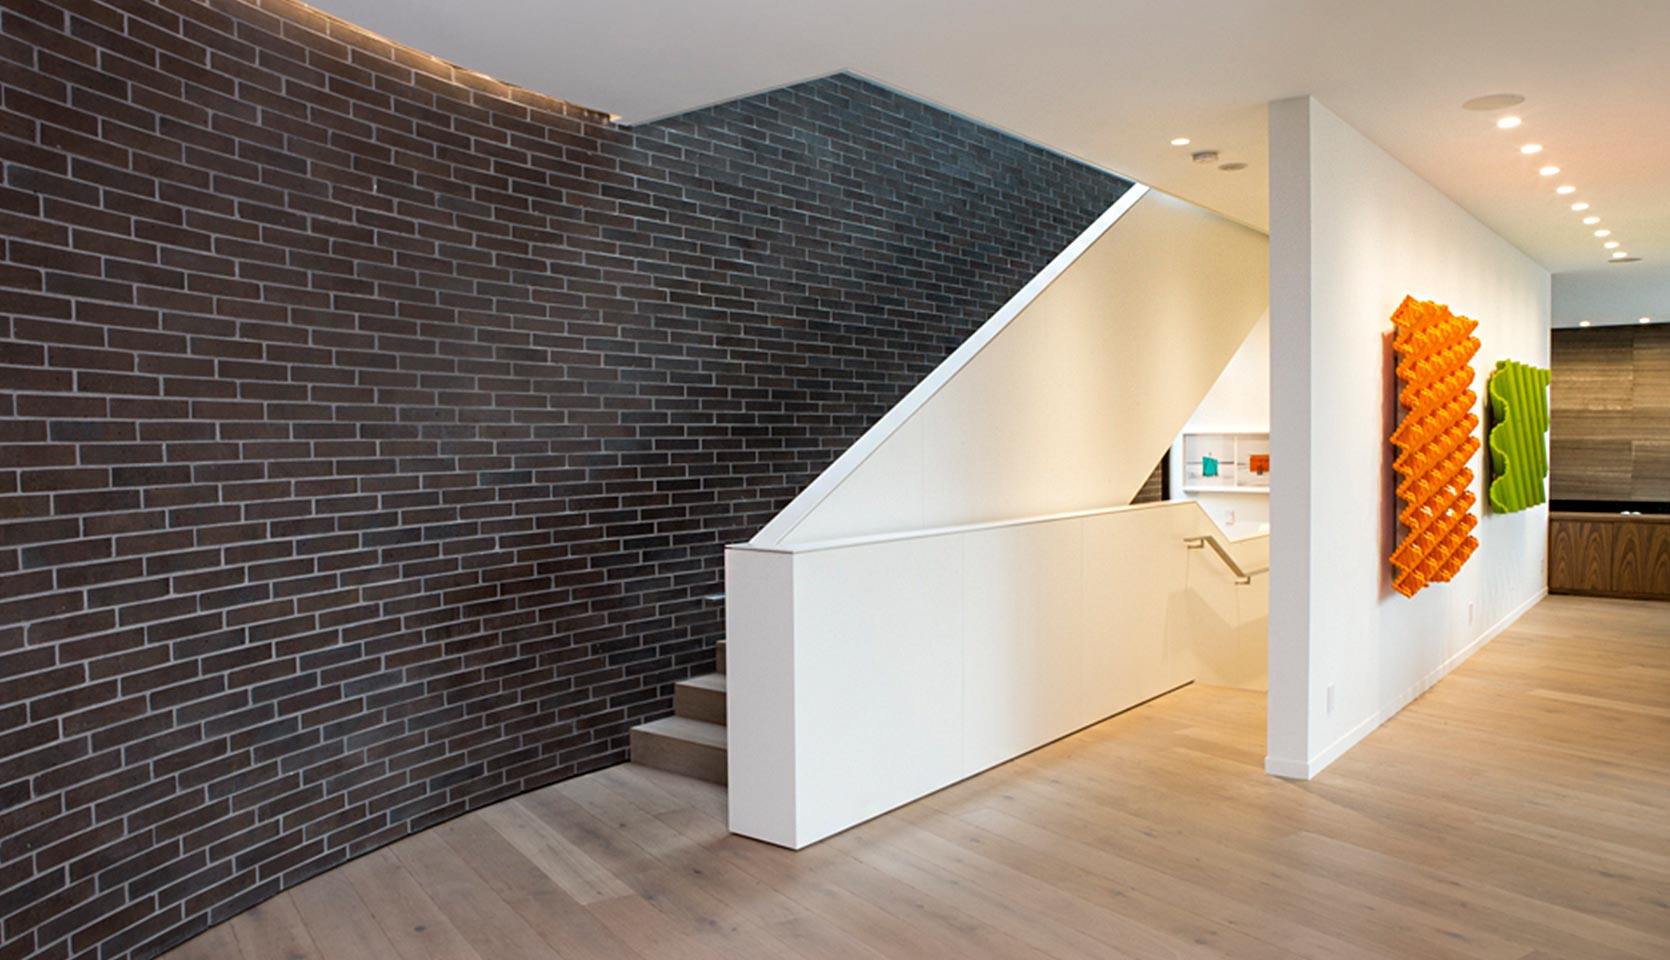 Curved brick interior wall design in home